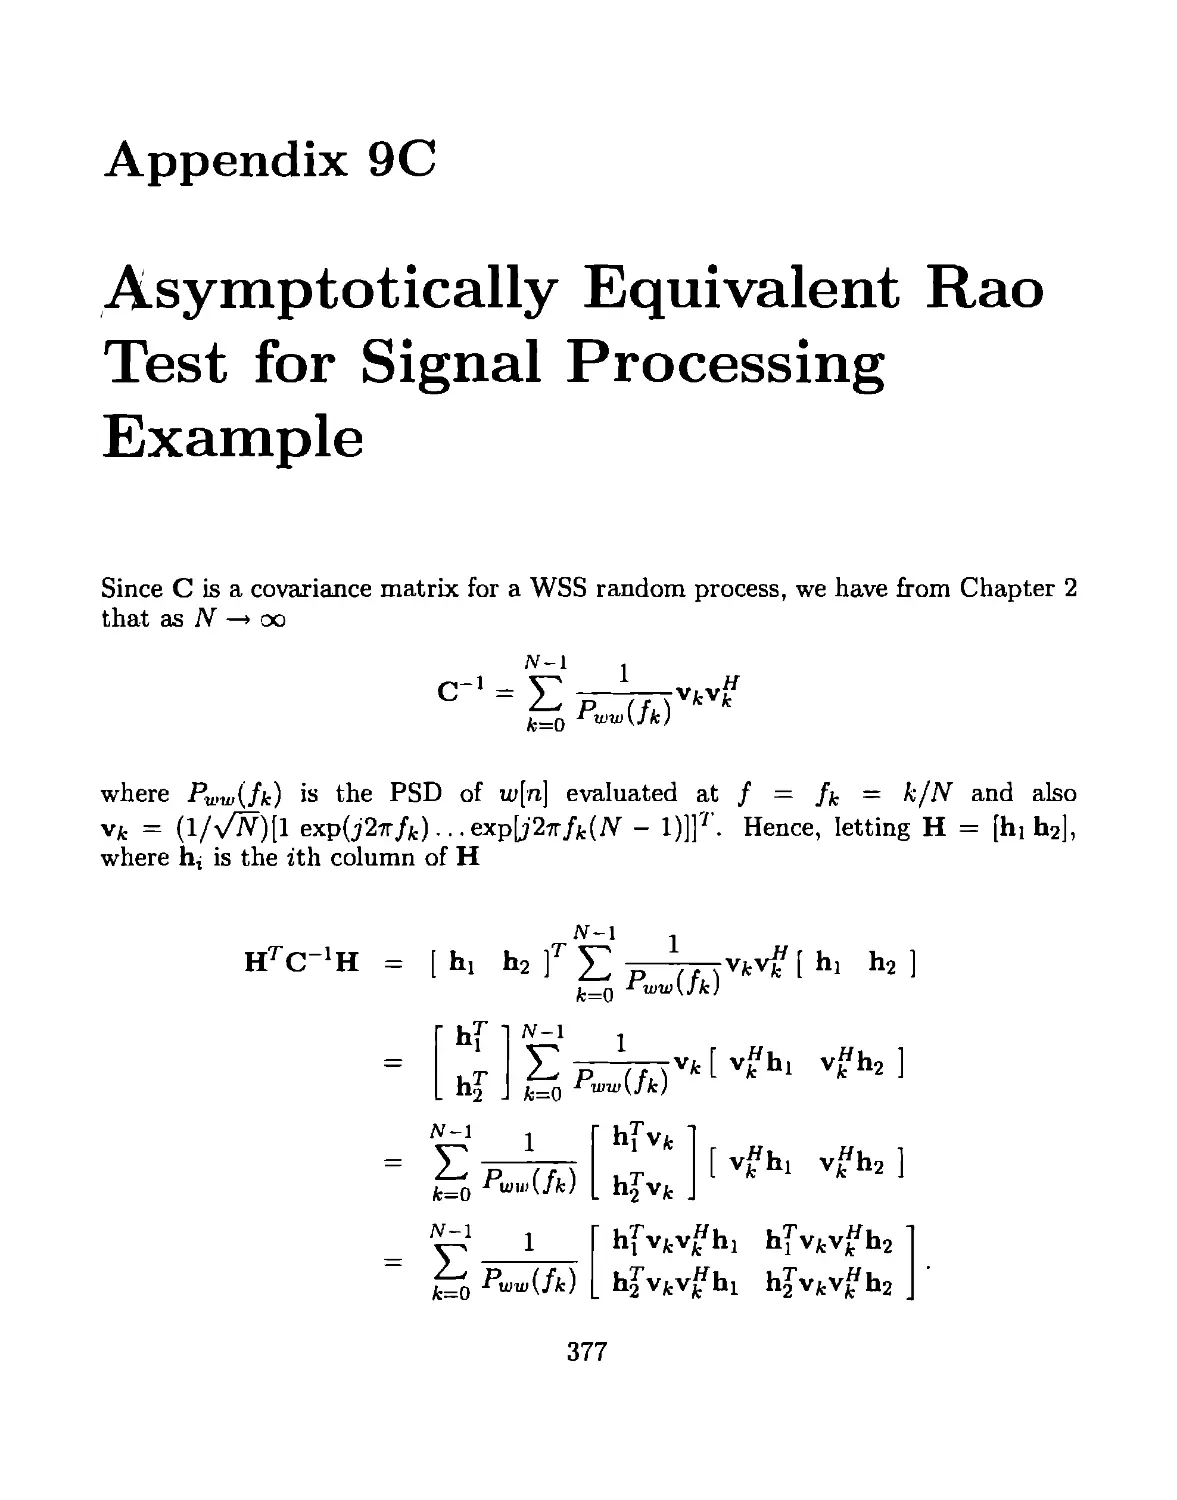 Appendix 9C Asymptotically Equivalemnt Rao Test for signal Processing Example